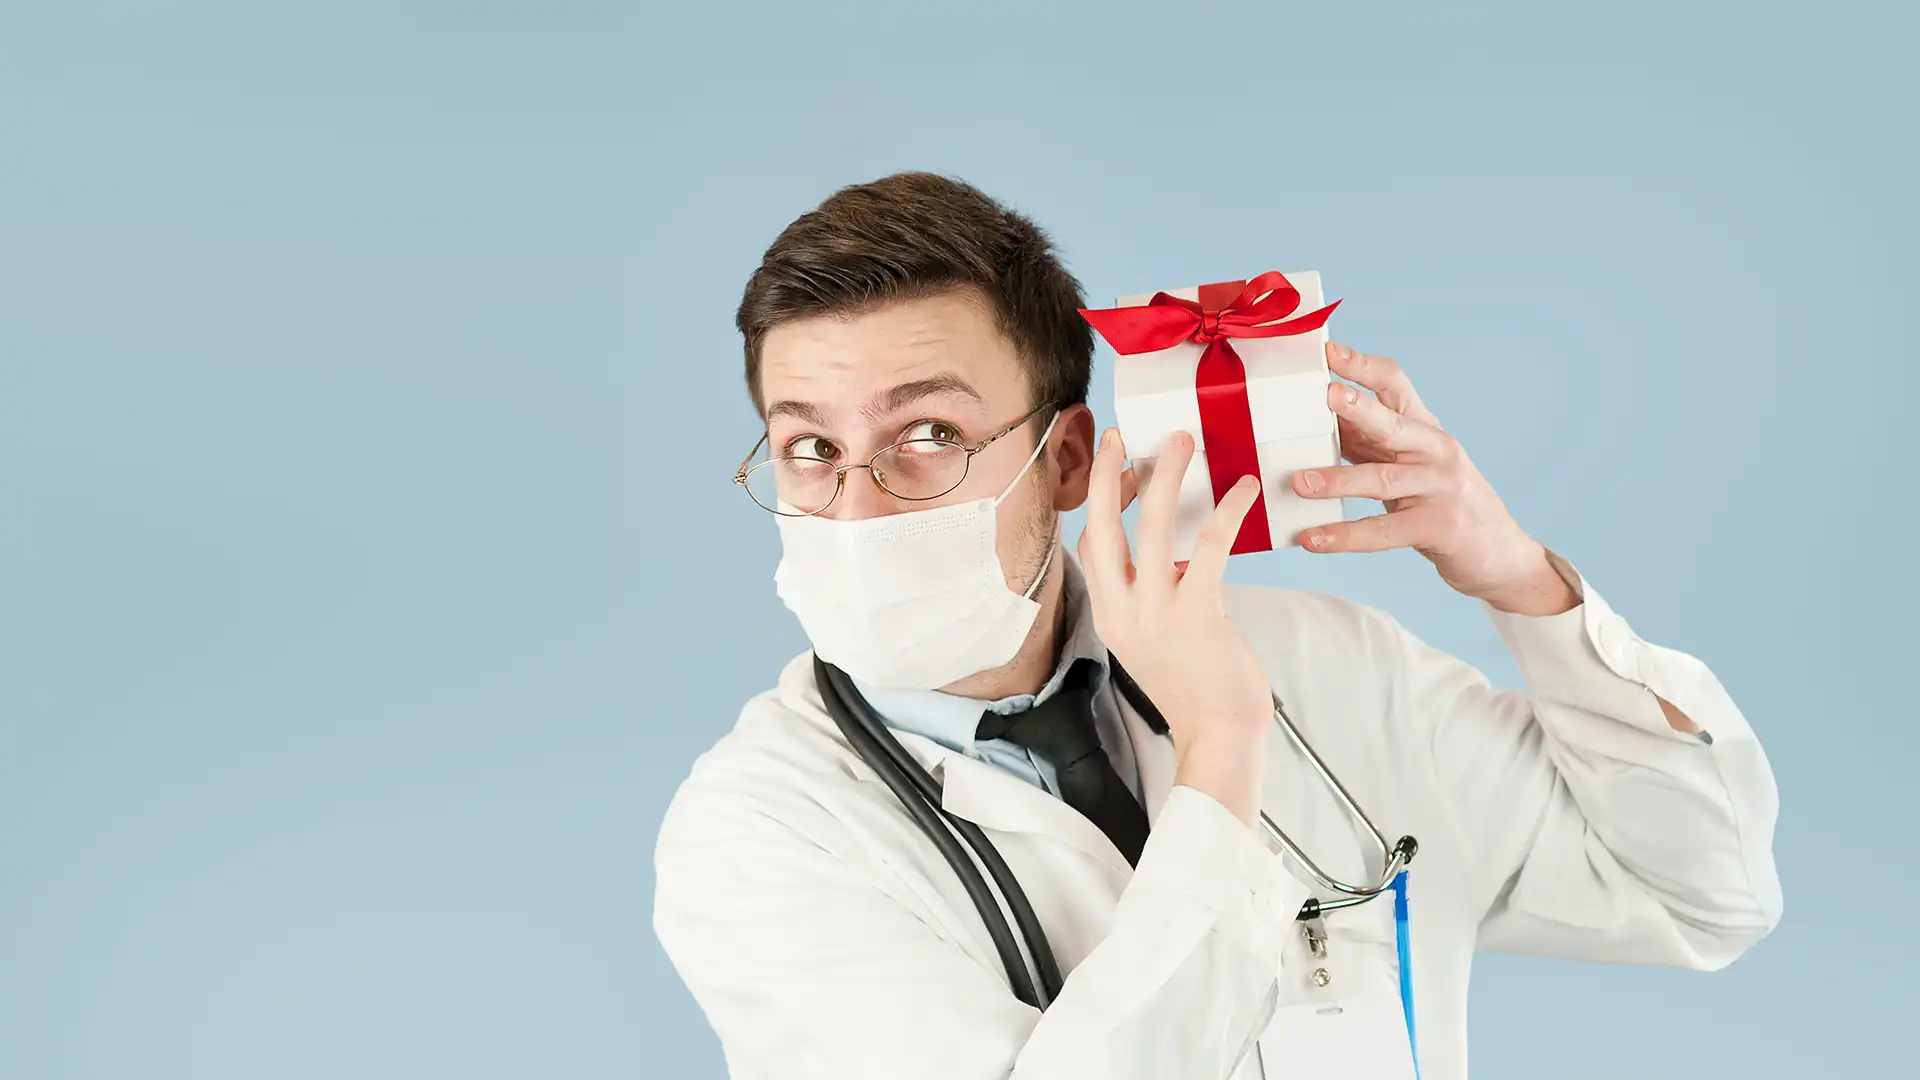 7 Christmas gift ideas your medical practice staff will love